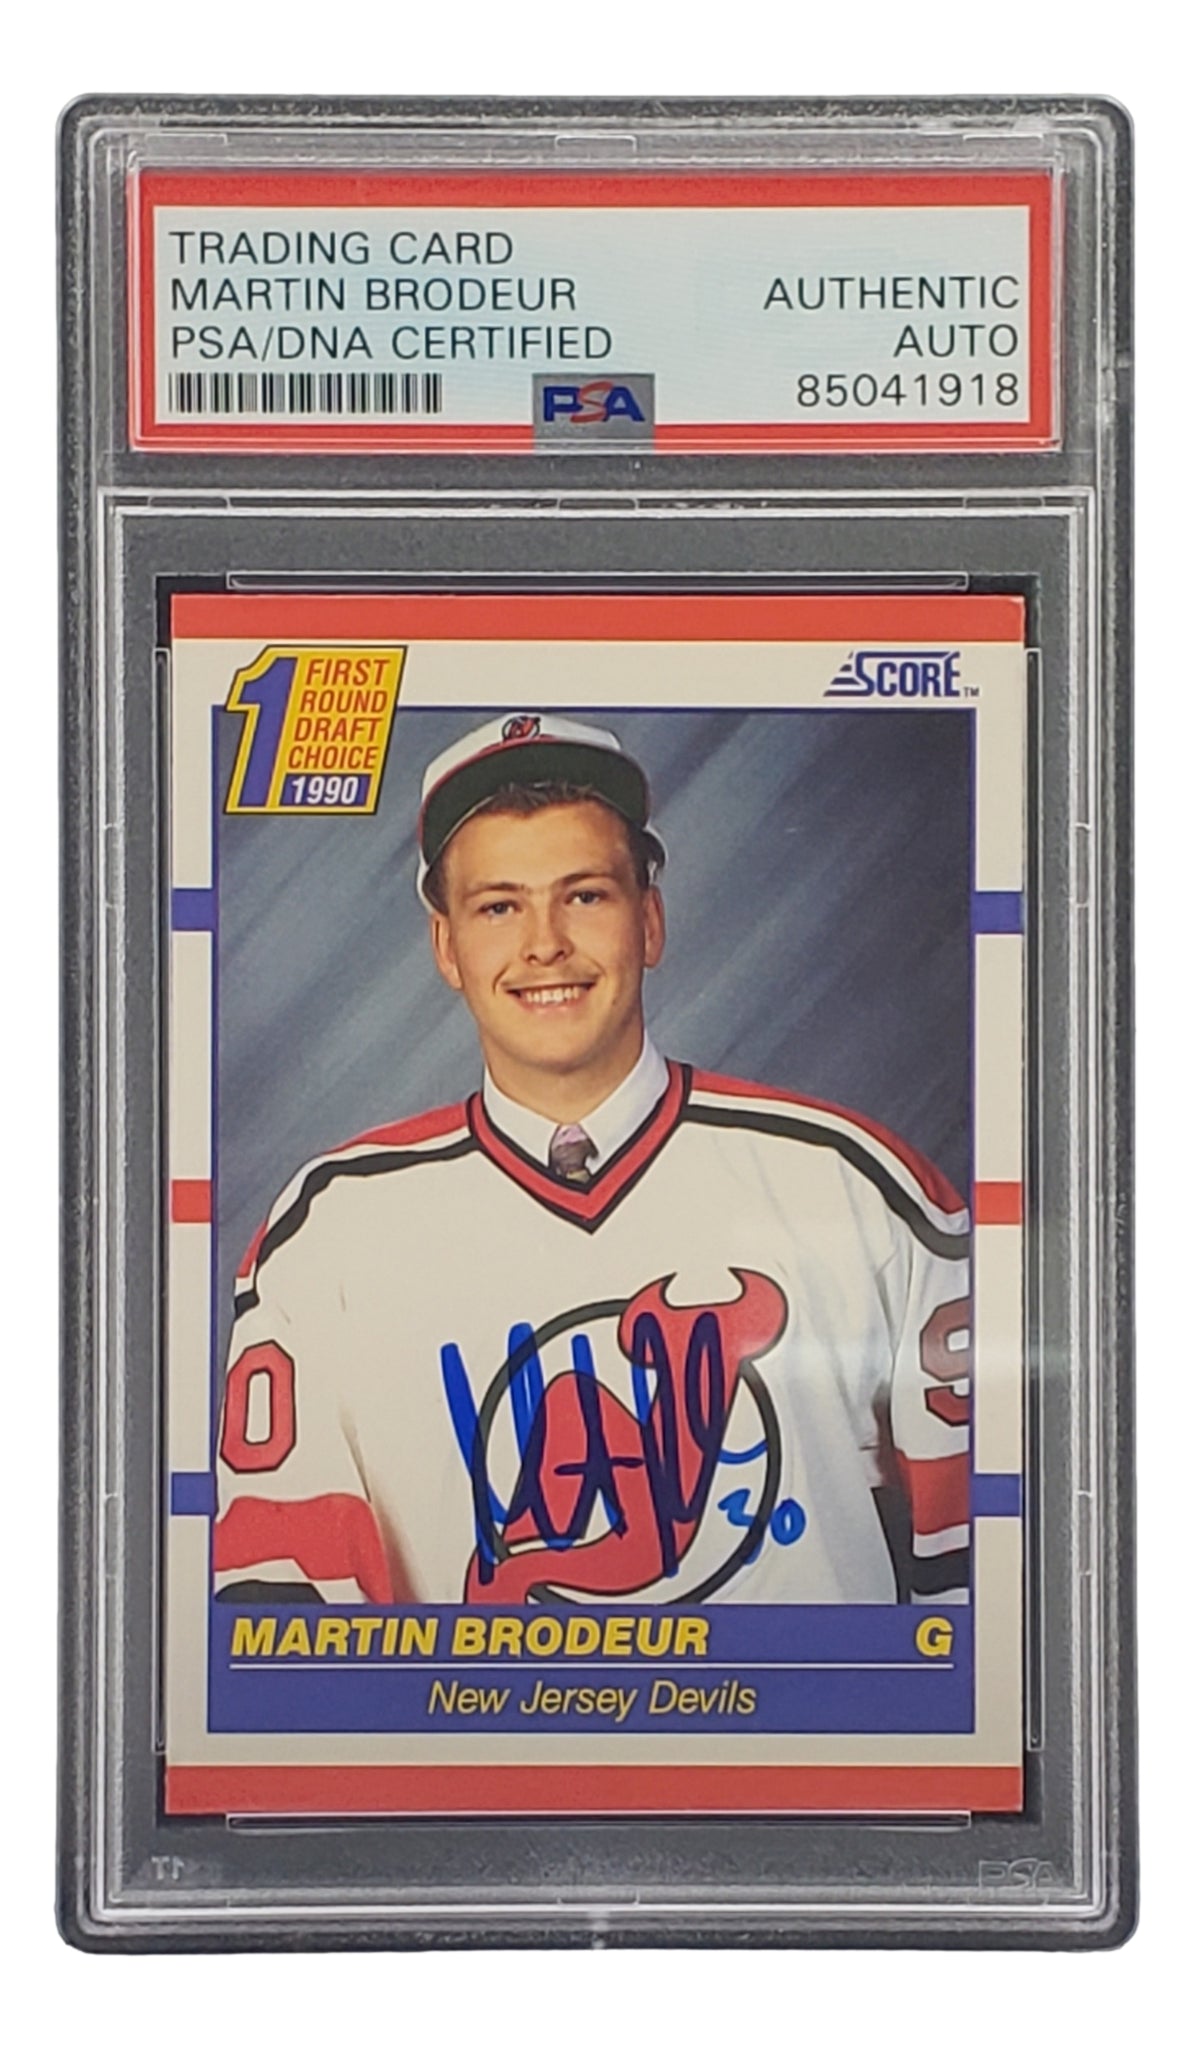 Martin Brodeur Signed 1990 Score New Jersey Devils Rookie Card #439 BAS